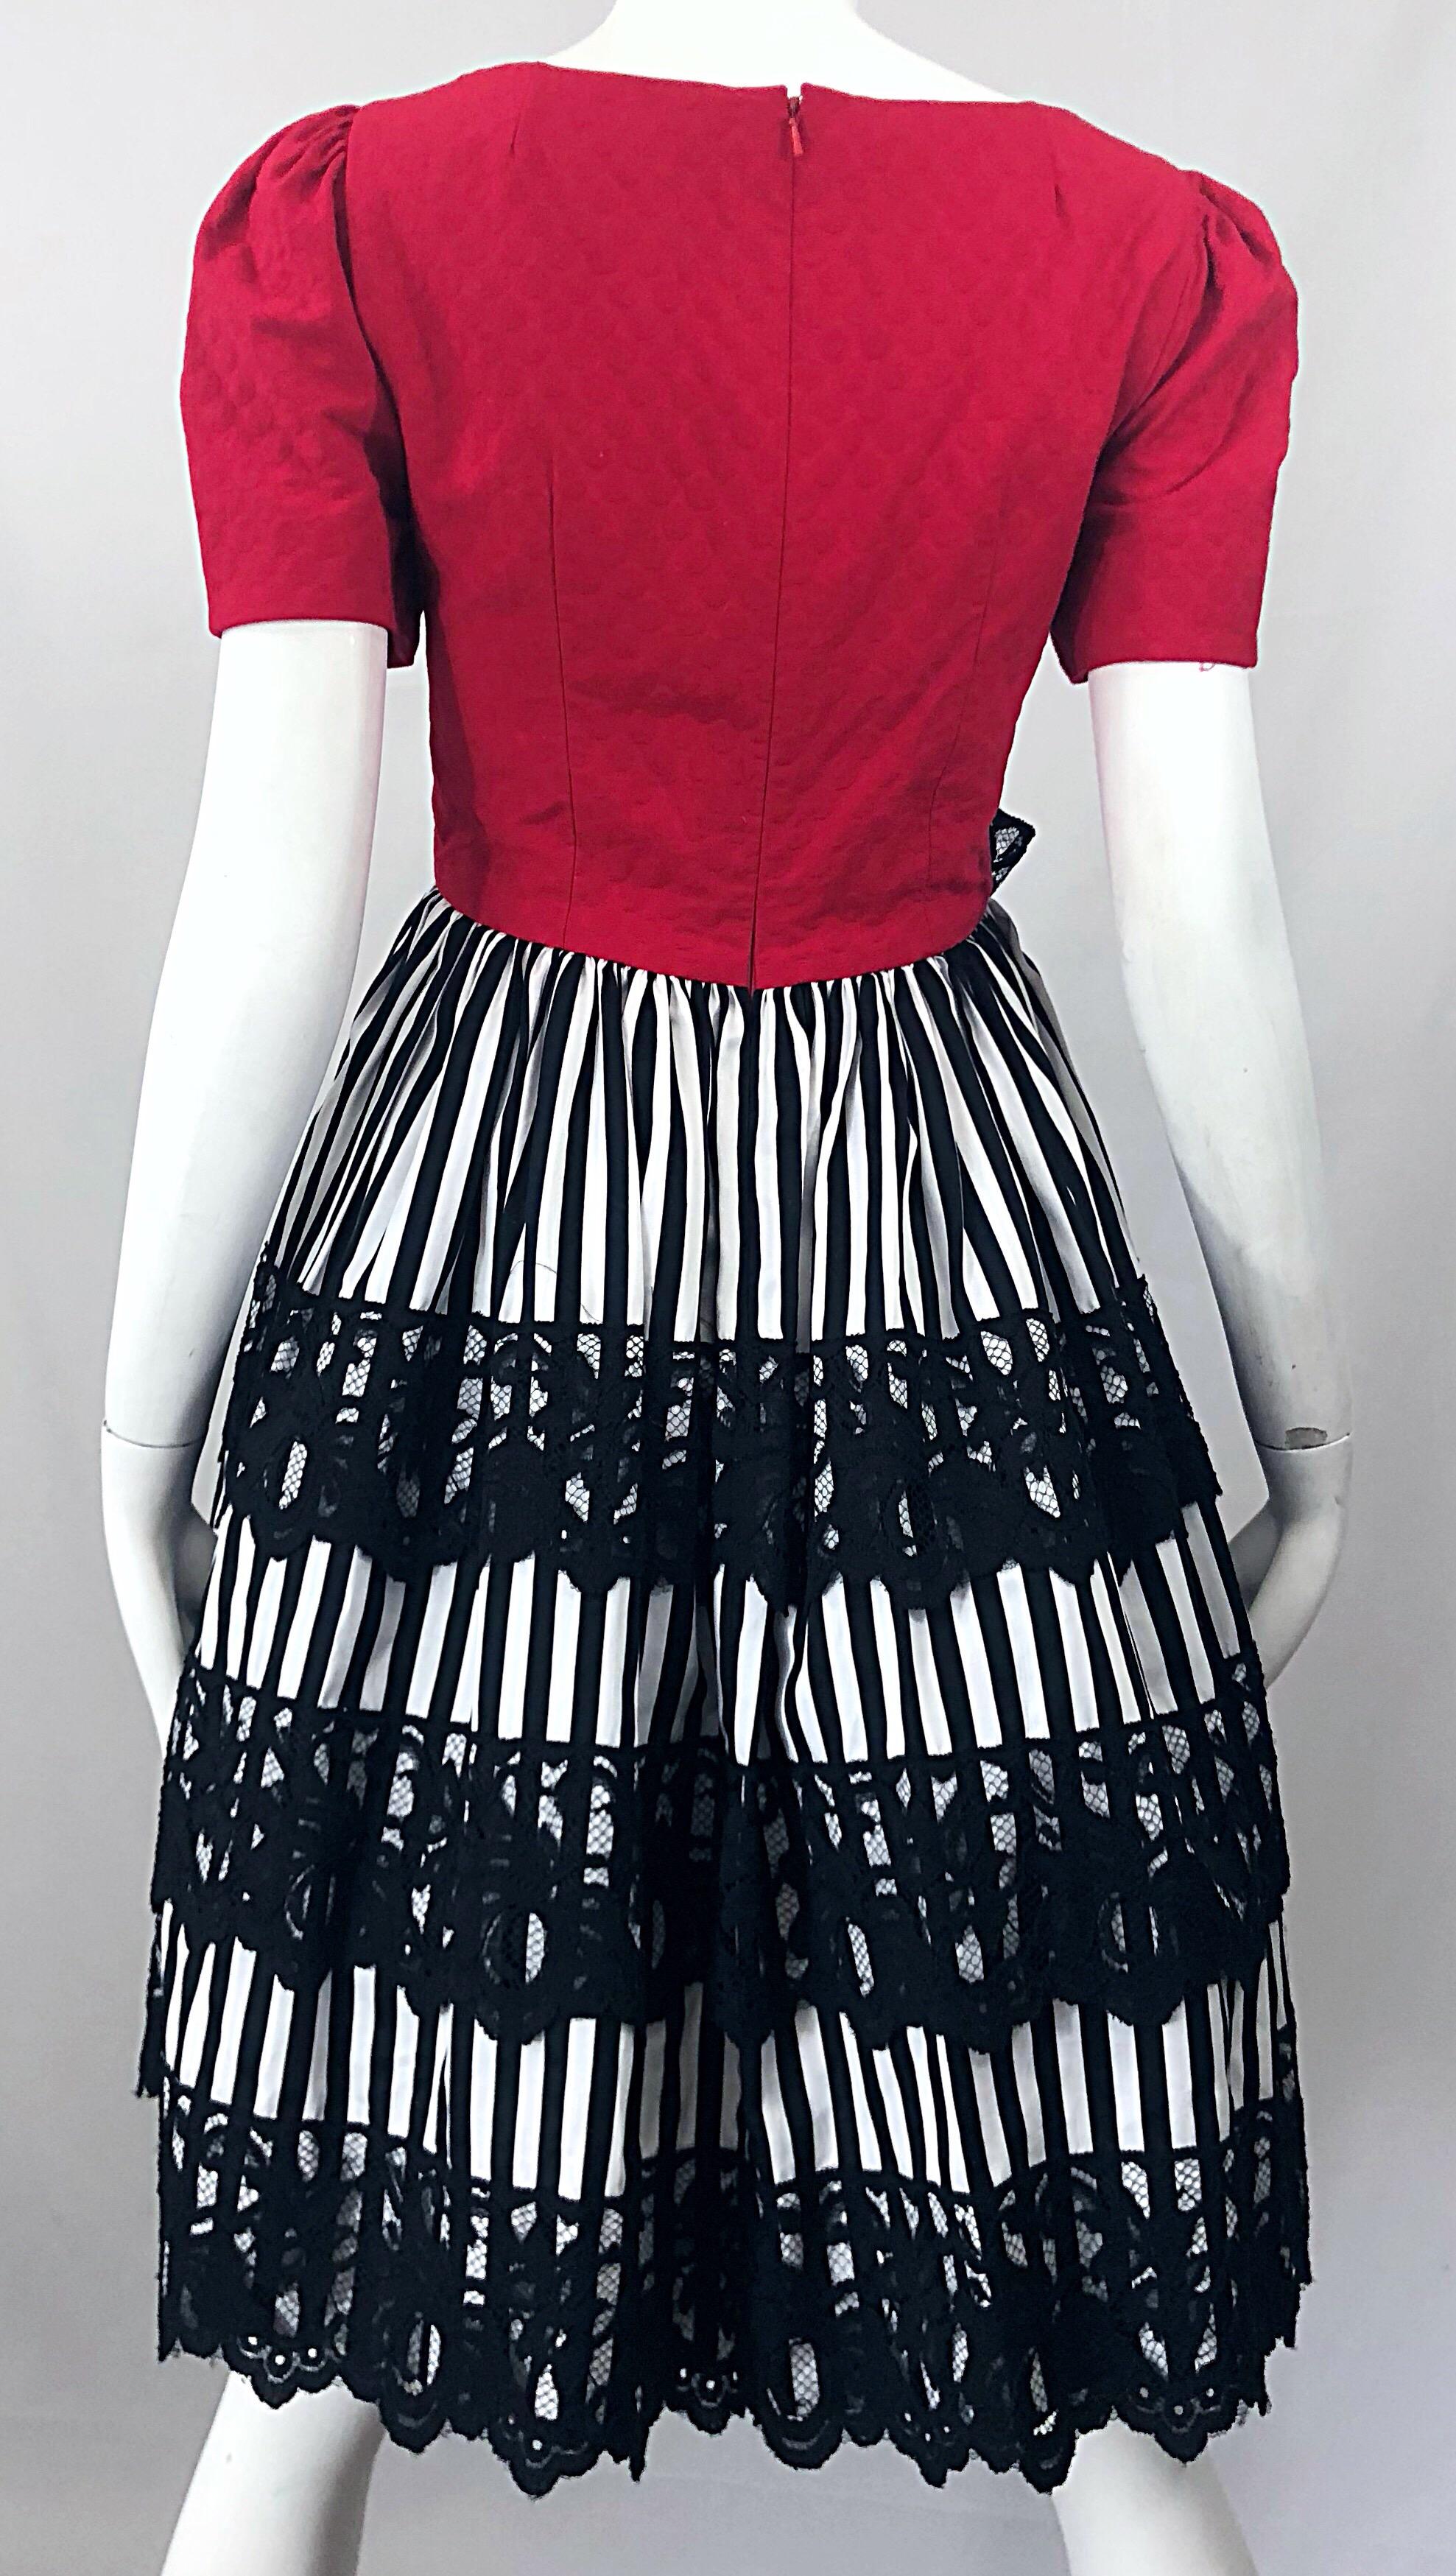 Vintage Adele Simpson 1980s Red Black White Fit n' Flare Empire Bow Lace Dress For Sale 8